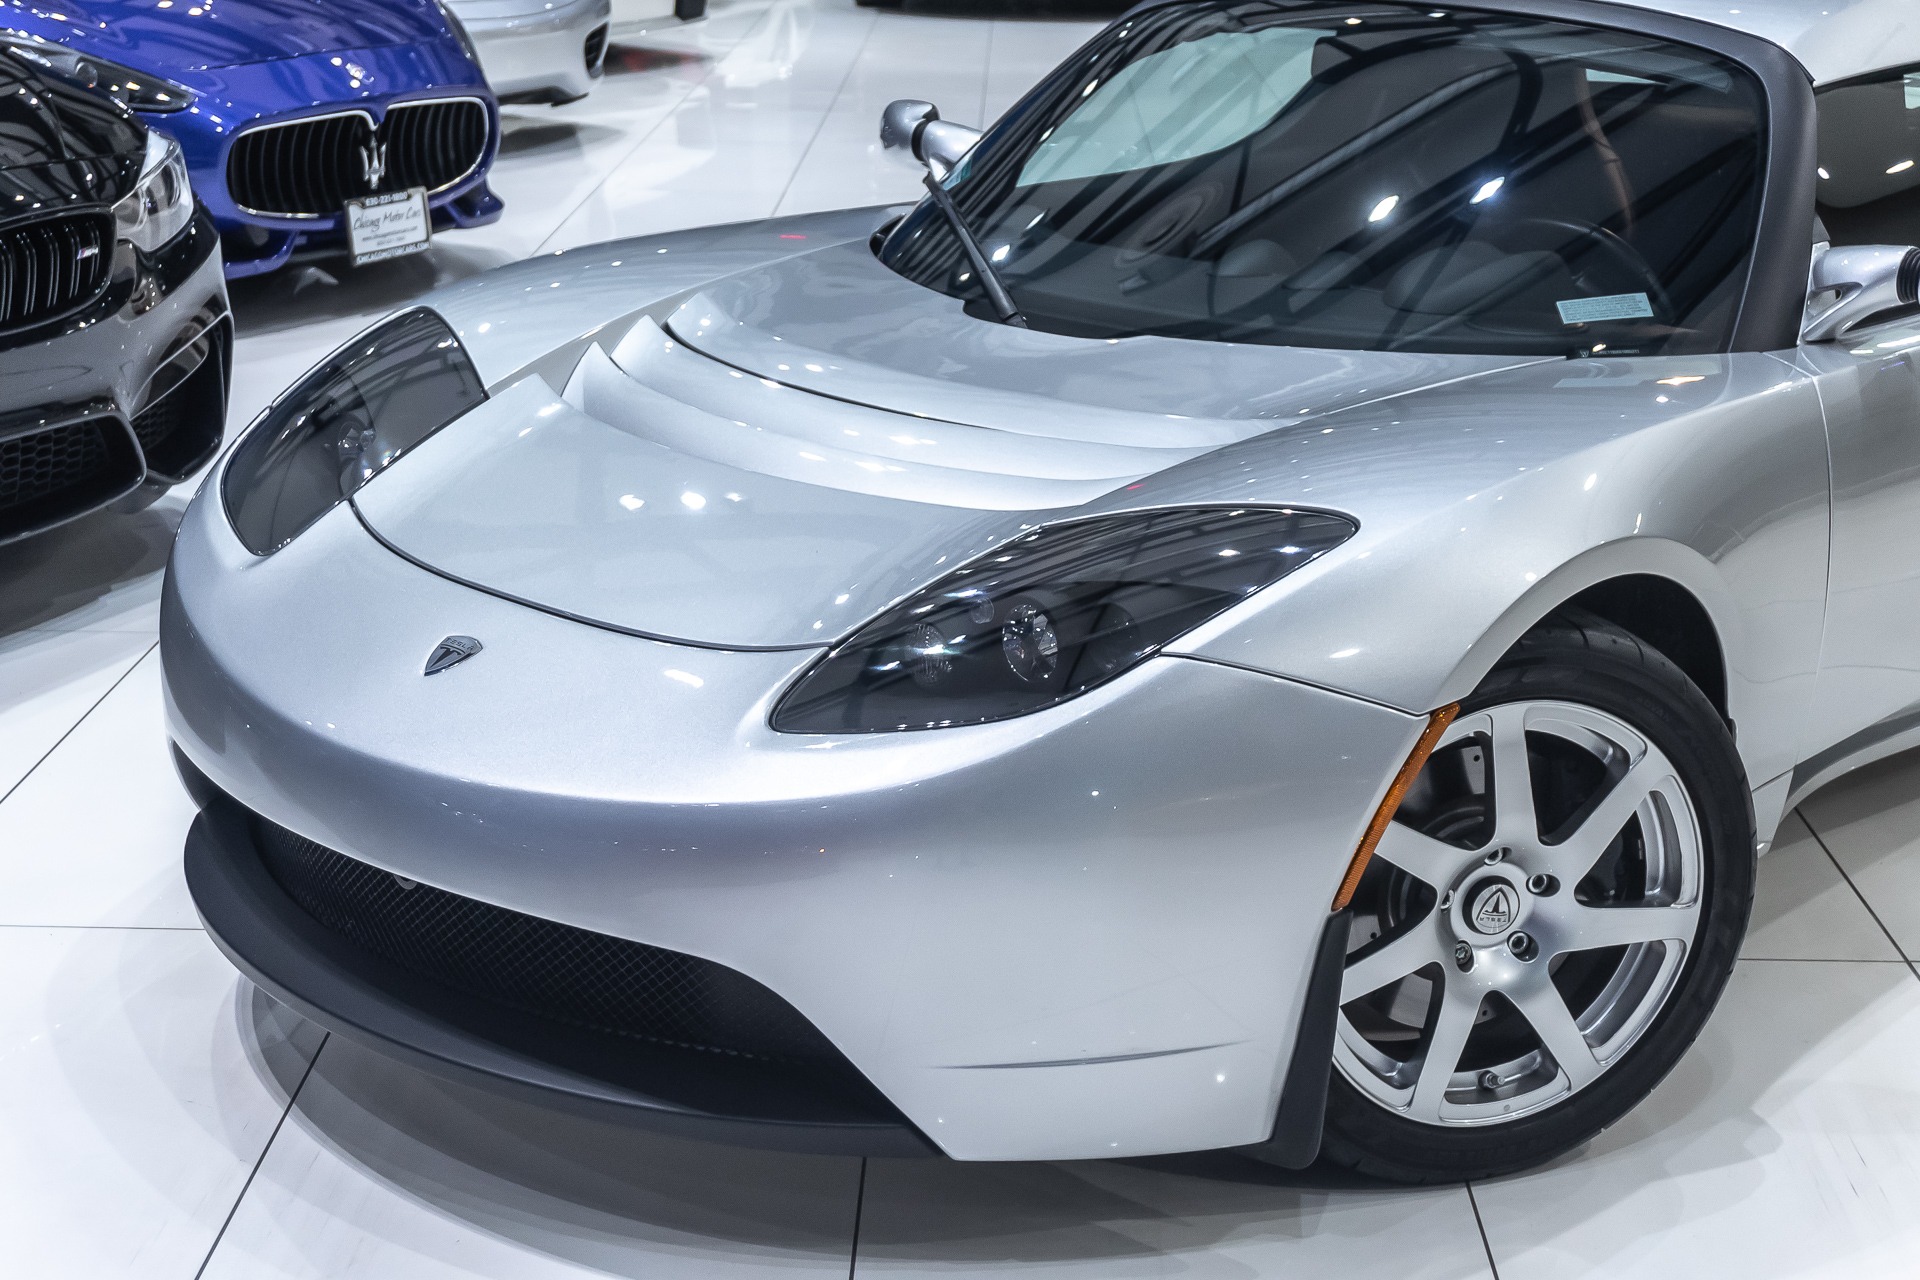 Used 2008 Tesla Roadster VERY RARE EXAMPLE! 1 OF 2,450 ...